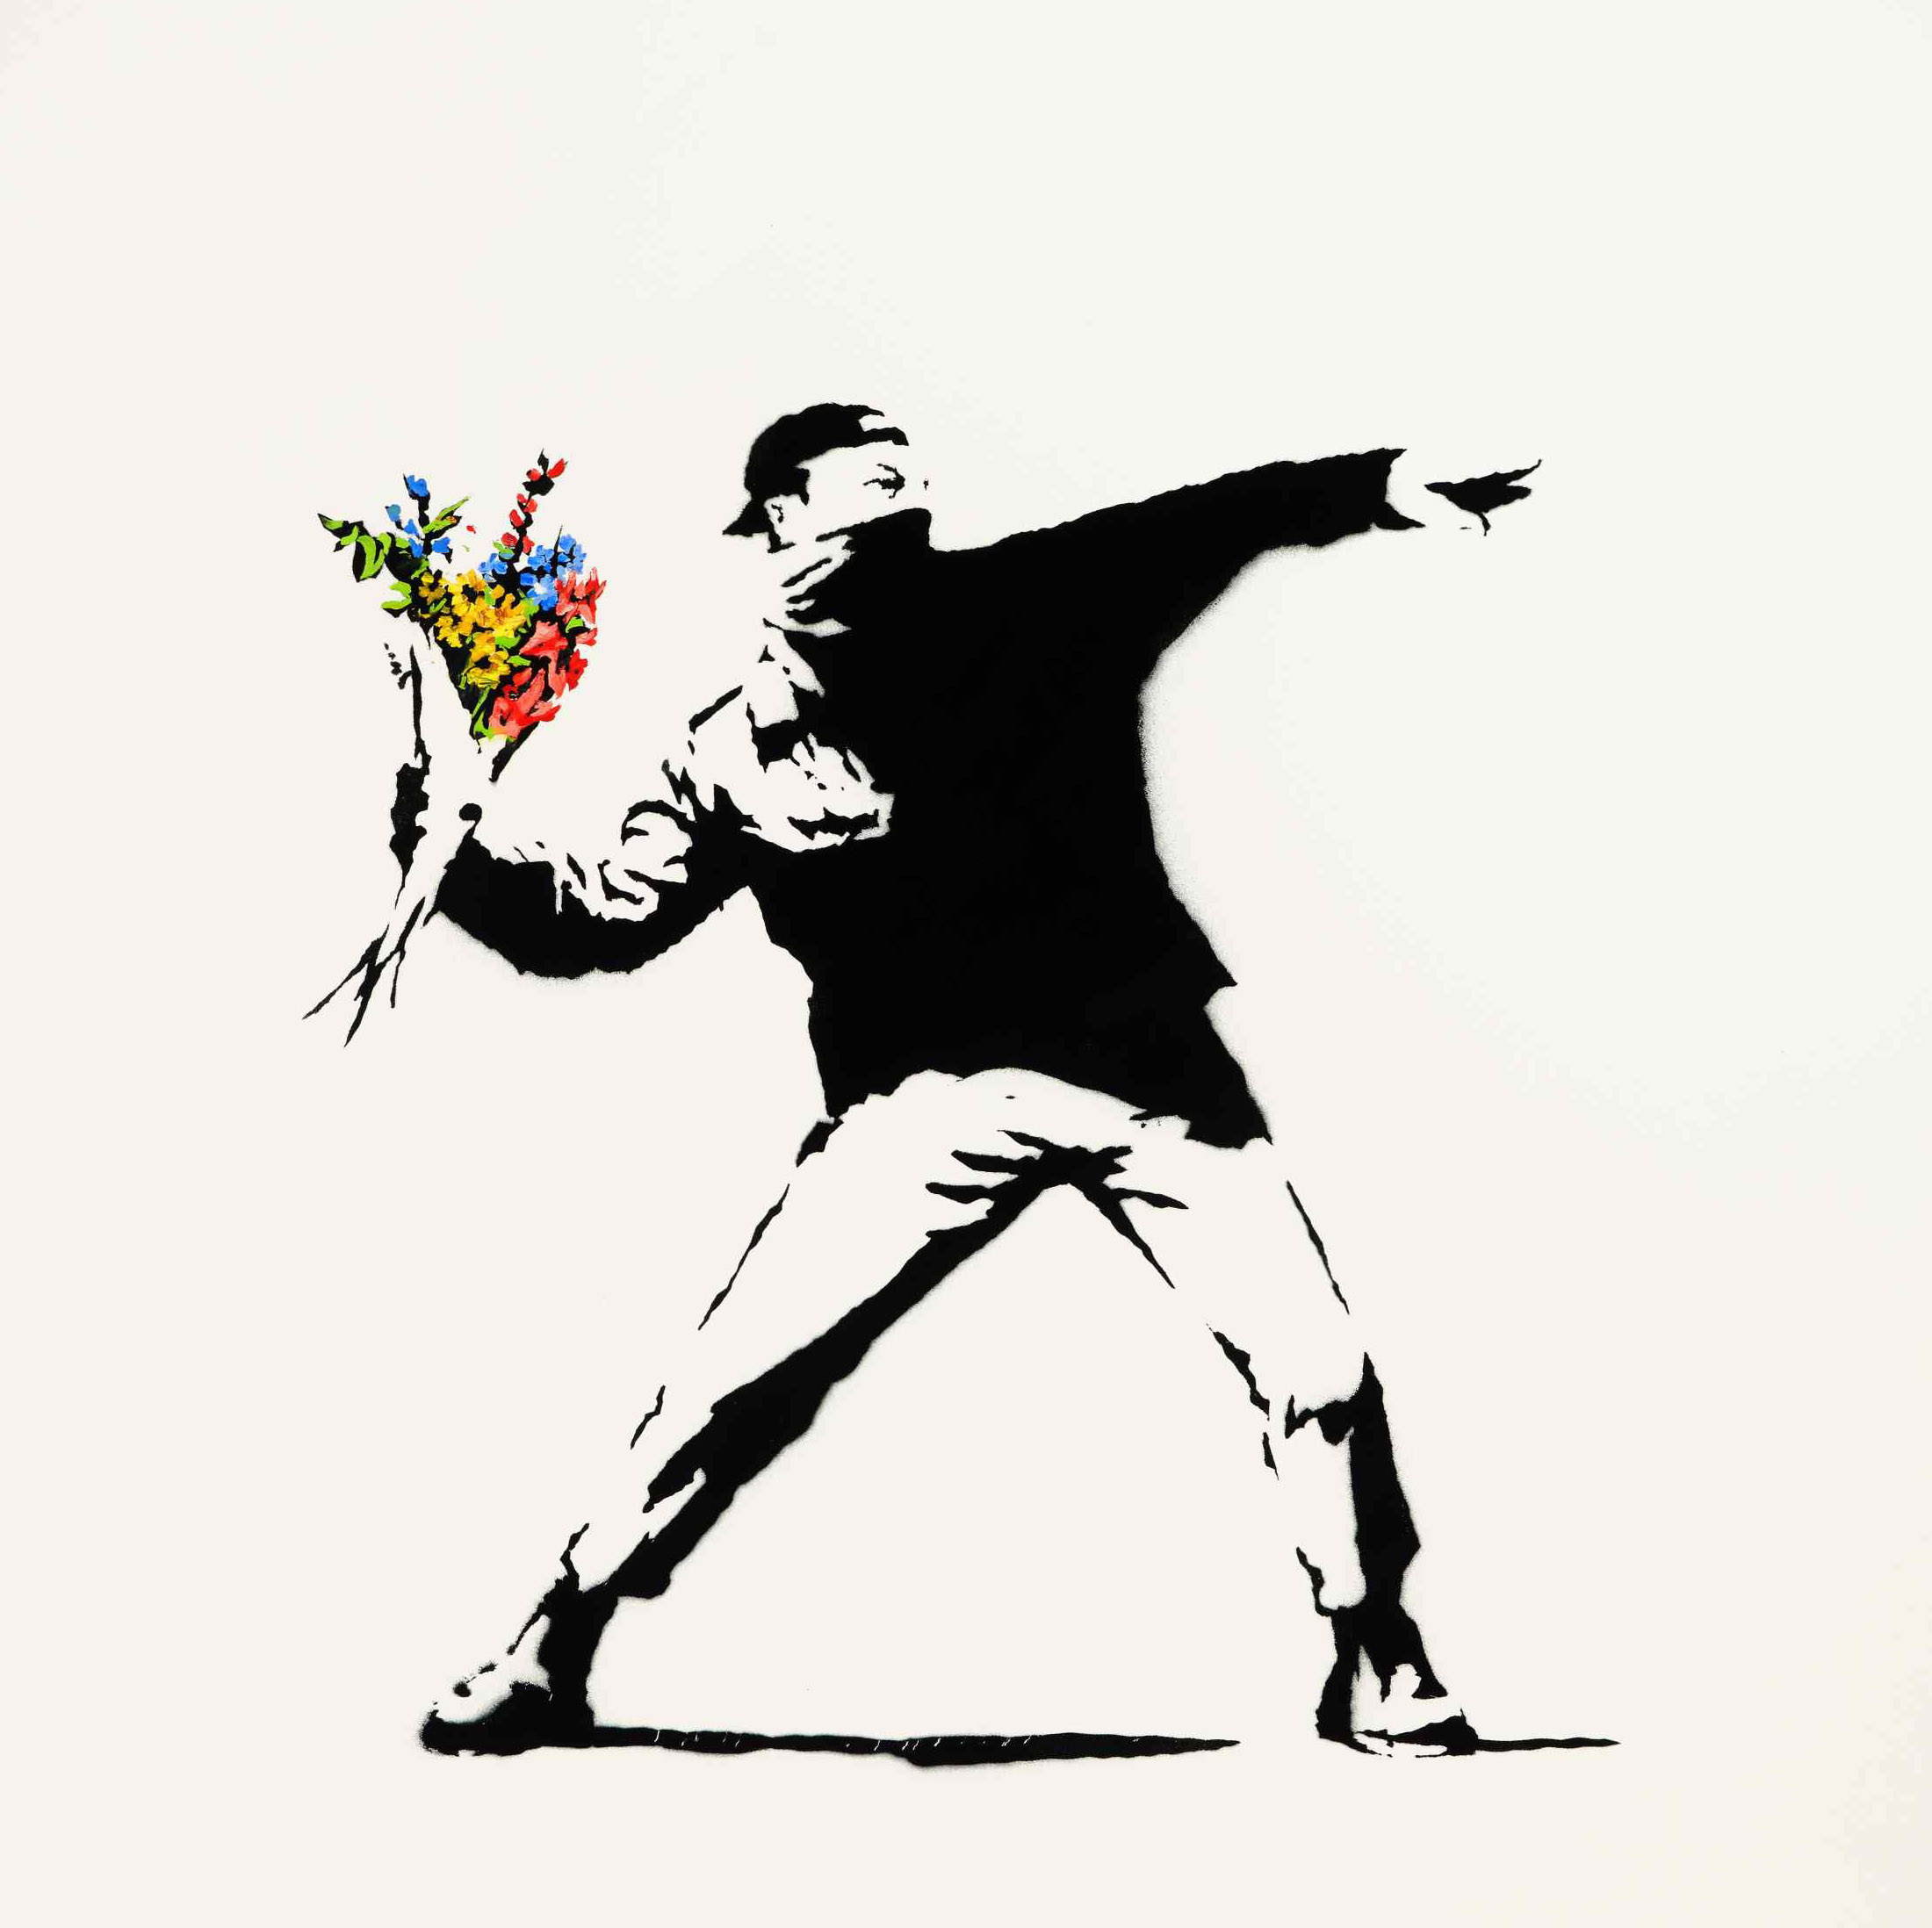 You’ll be able to buy Banksy’s iconic “Love is in the Air” via Bitcoin and Ethereum